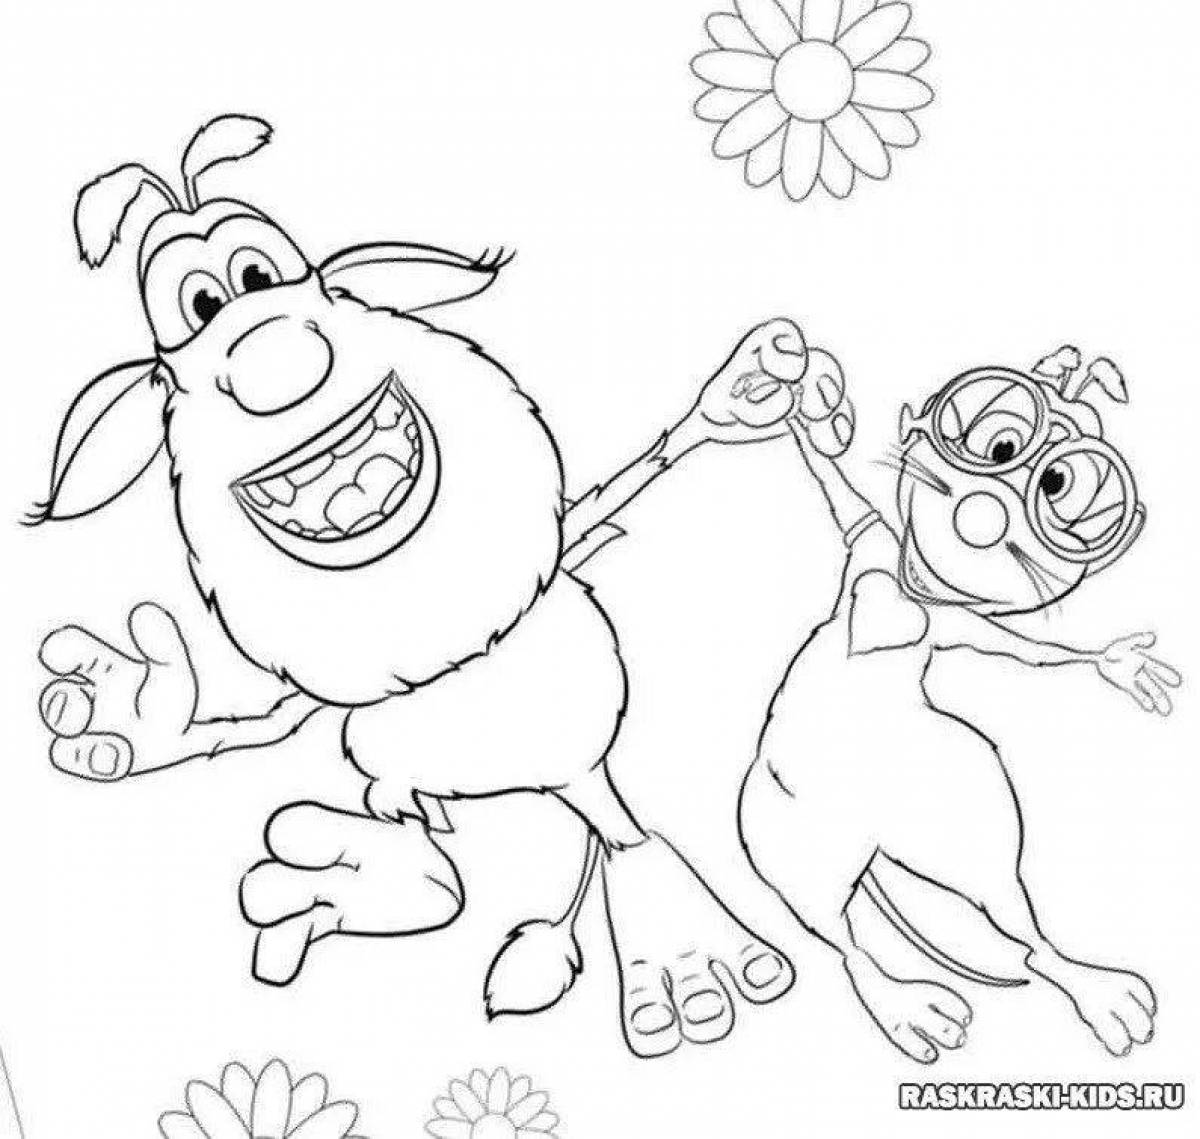 Colour-obsessed buba and mouse coloring pages